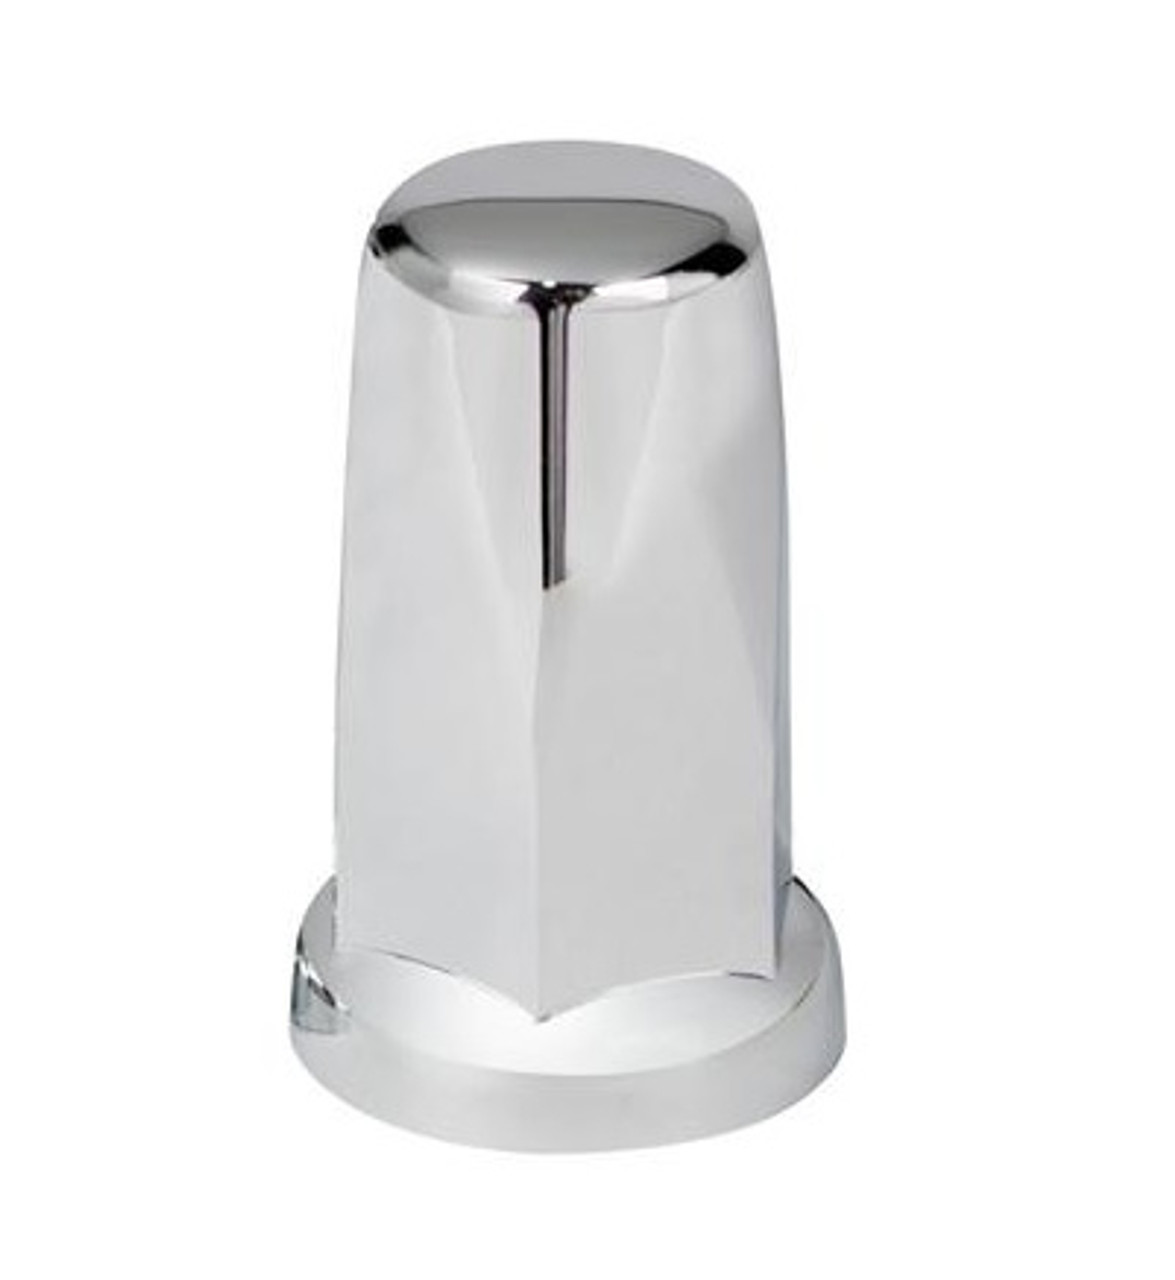 33mm X 3-1/4" Chrome Plastic Tall Nut Cover With Flange - Push-On